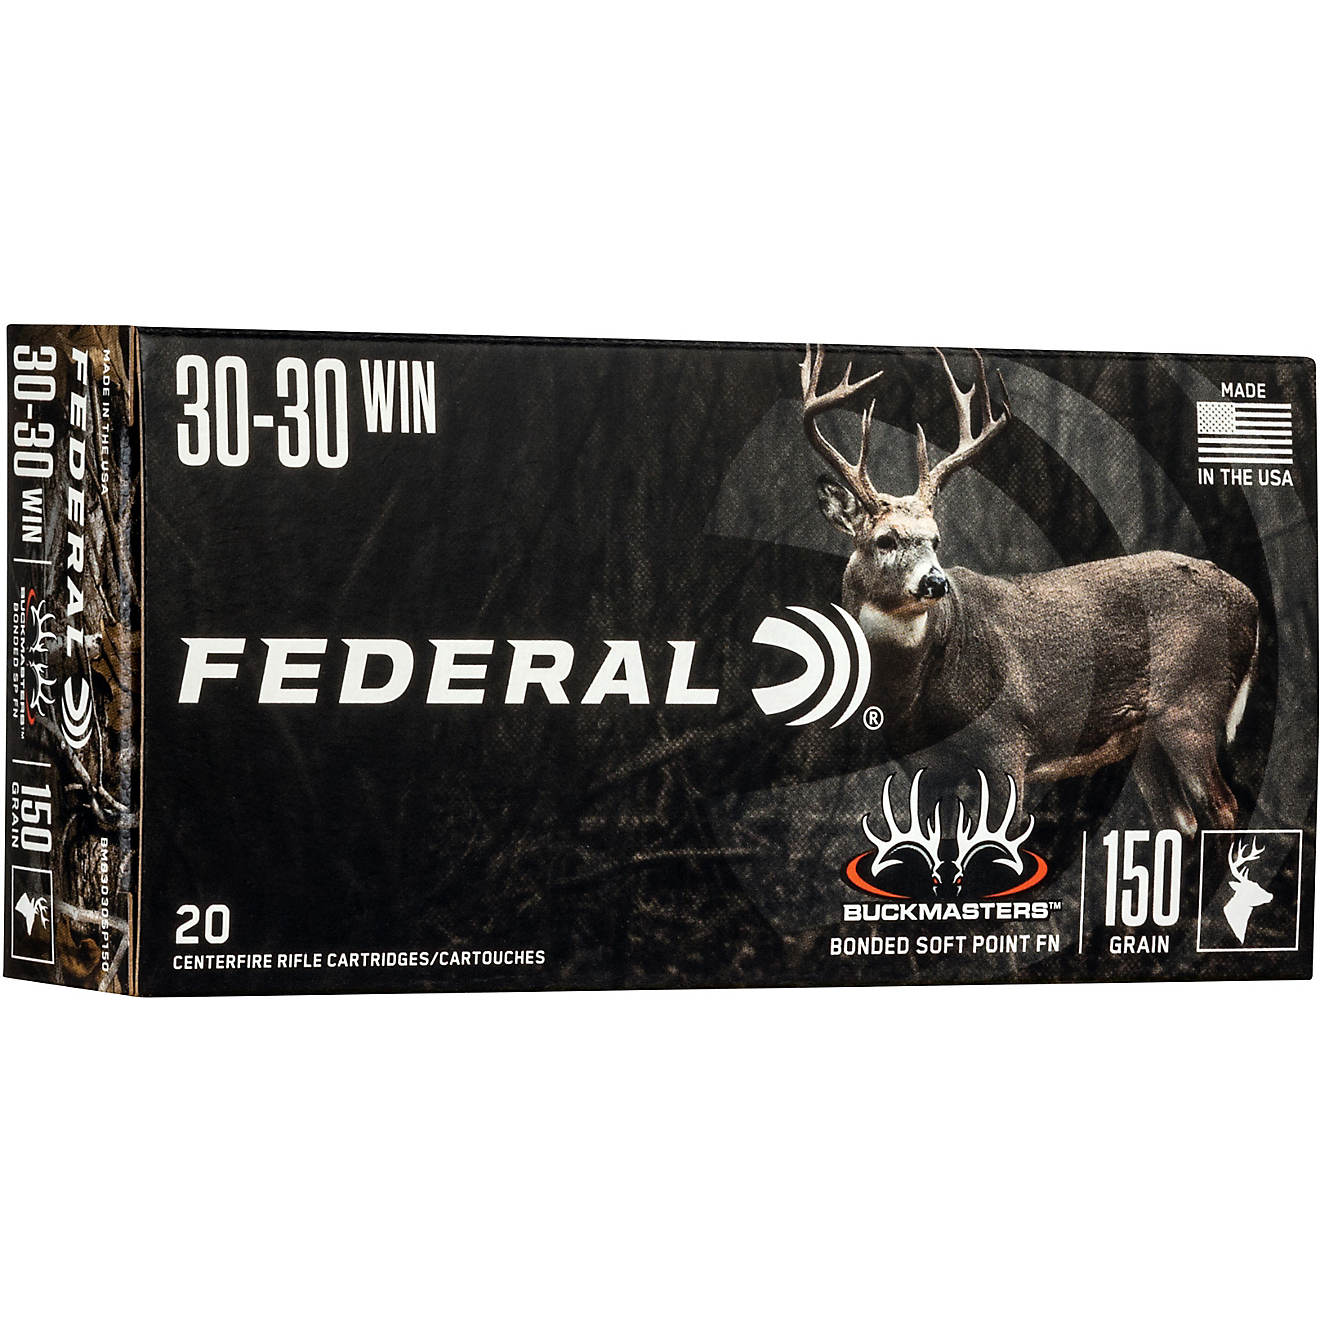 Federal Premium Buckmasters Bonded Soft Point .30-30 Win 150-Grain Centerfire Rifle Ammunition - 20 Rounds                       - view number 1